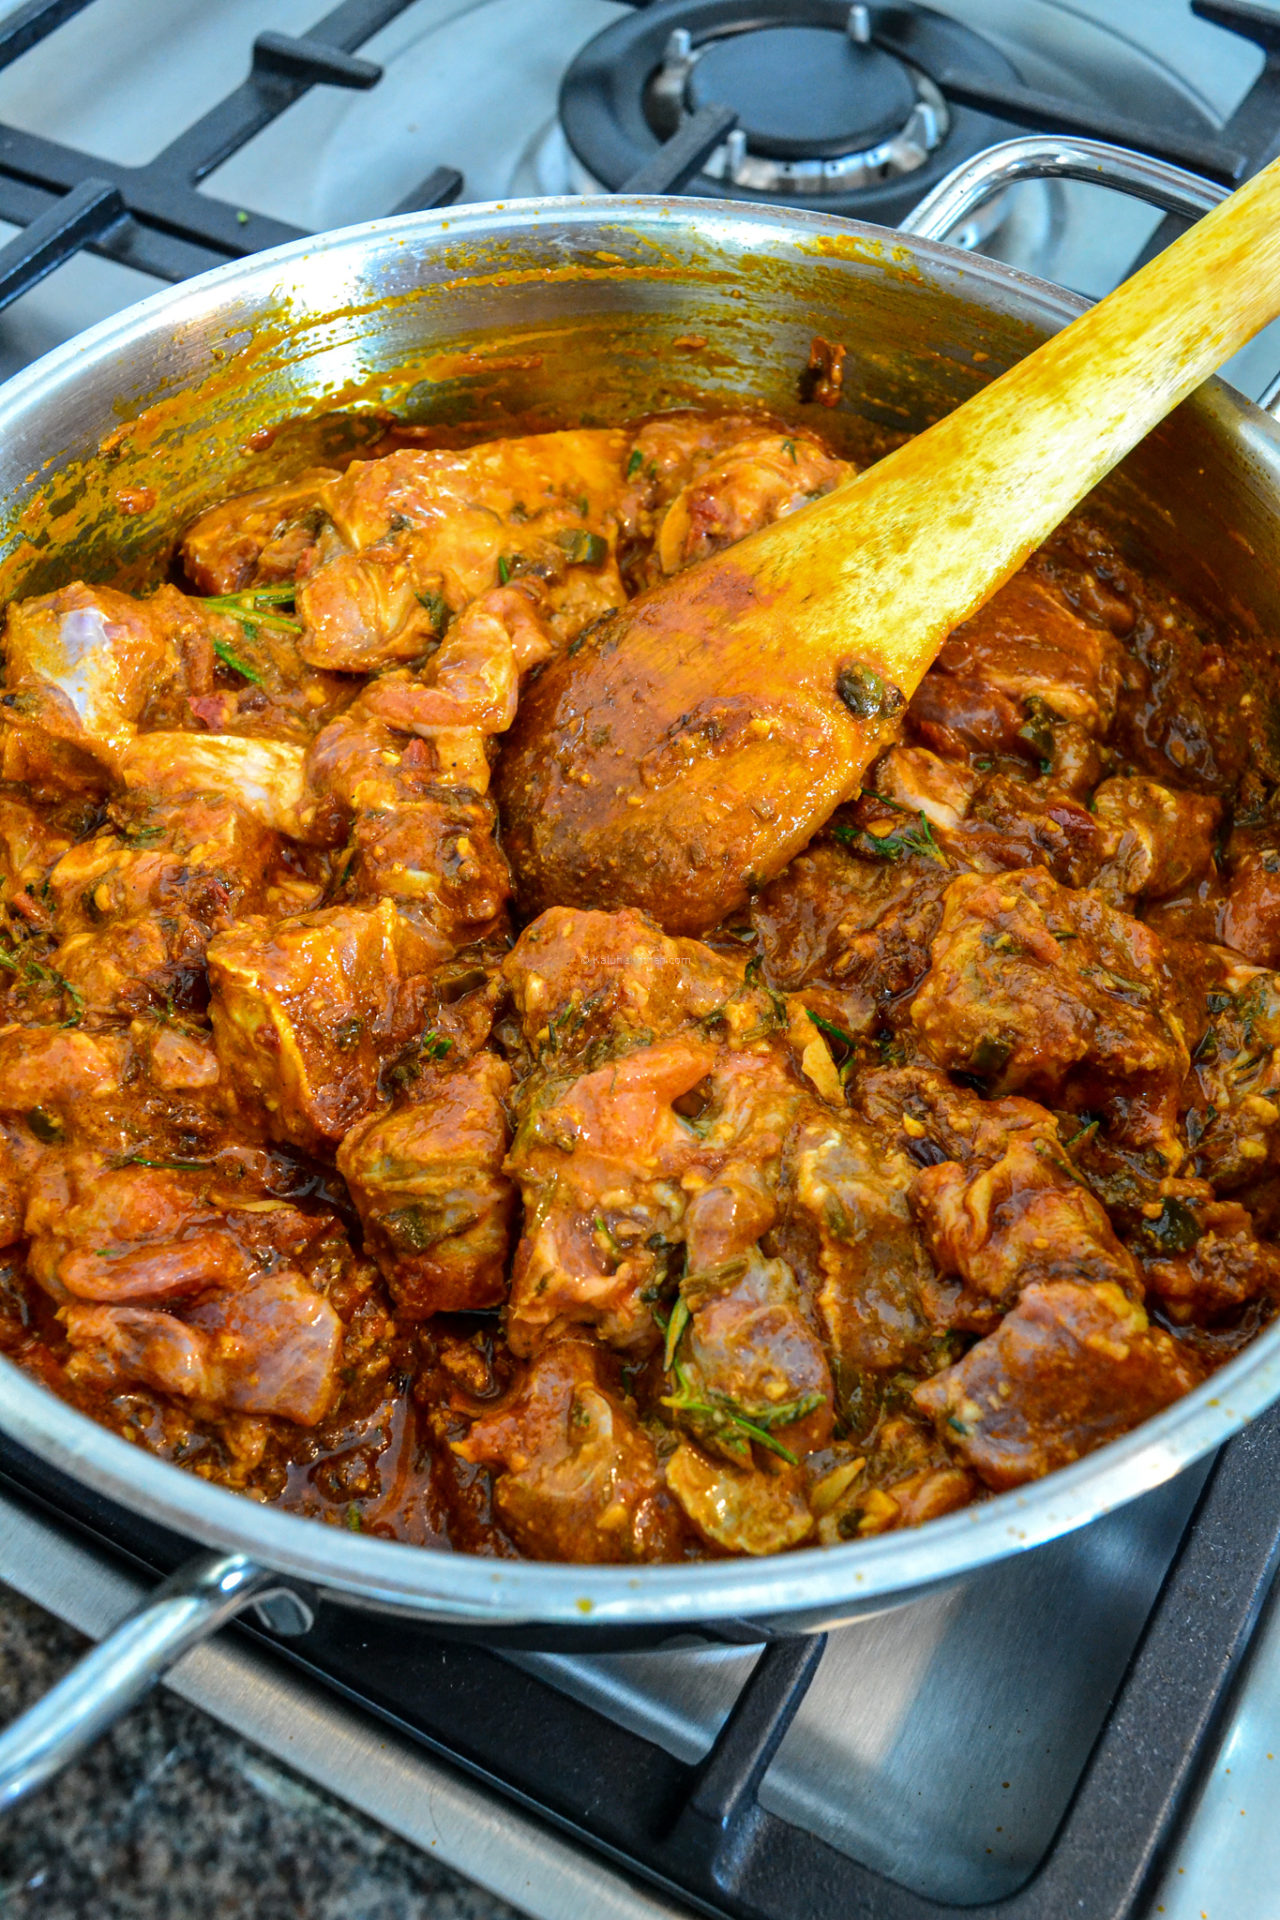 Mbuzi dry fry is the best way to enjoy goat meat. Slow cooked, super tender and really flavorful as a result